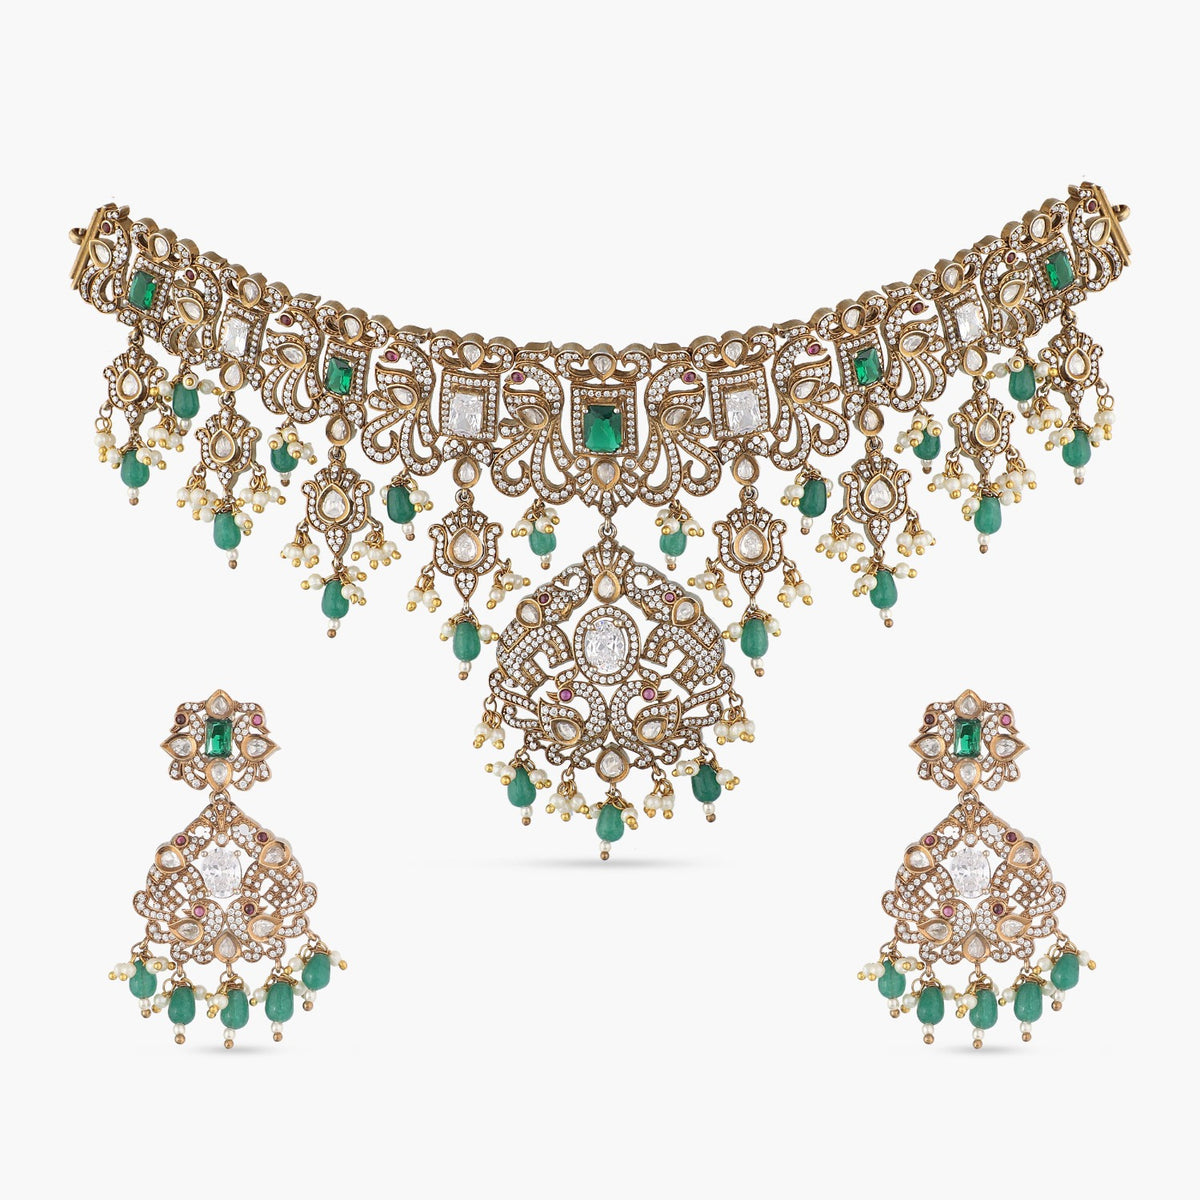 An image of Indian artificial jewelry. It is an antique gold plated short necklace with matching earrings set, featuring green gemstones and Cubic Zirconia.